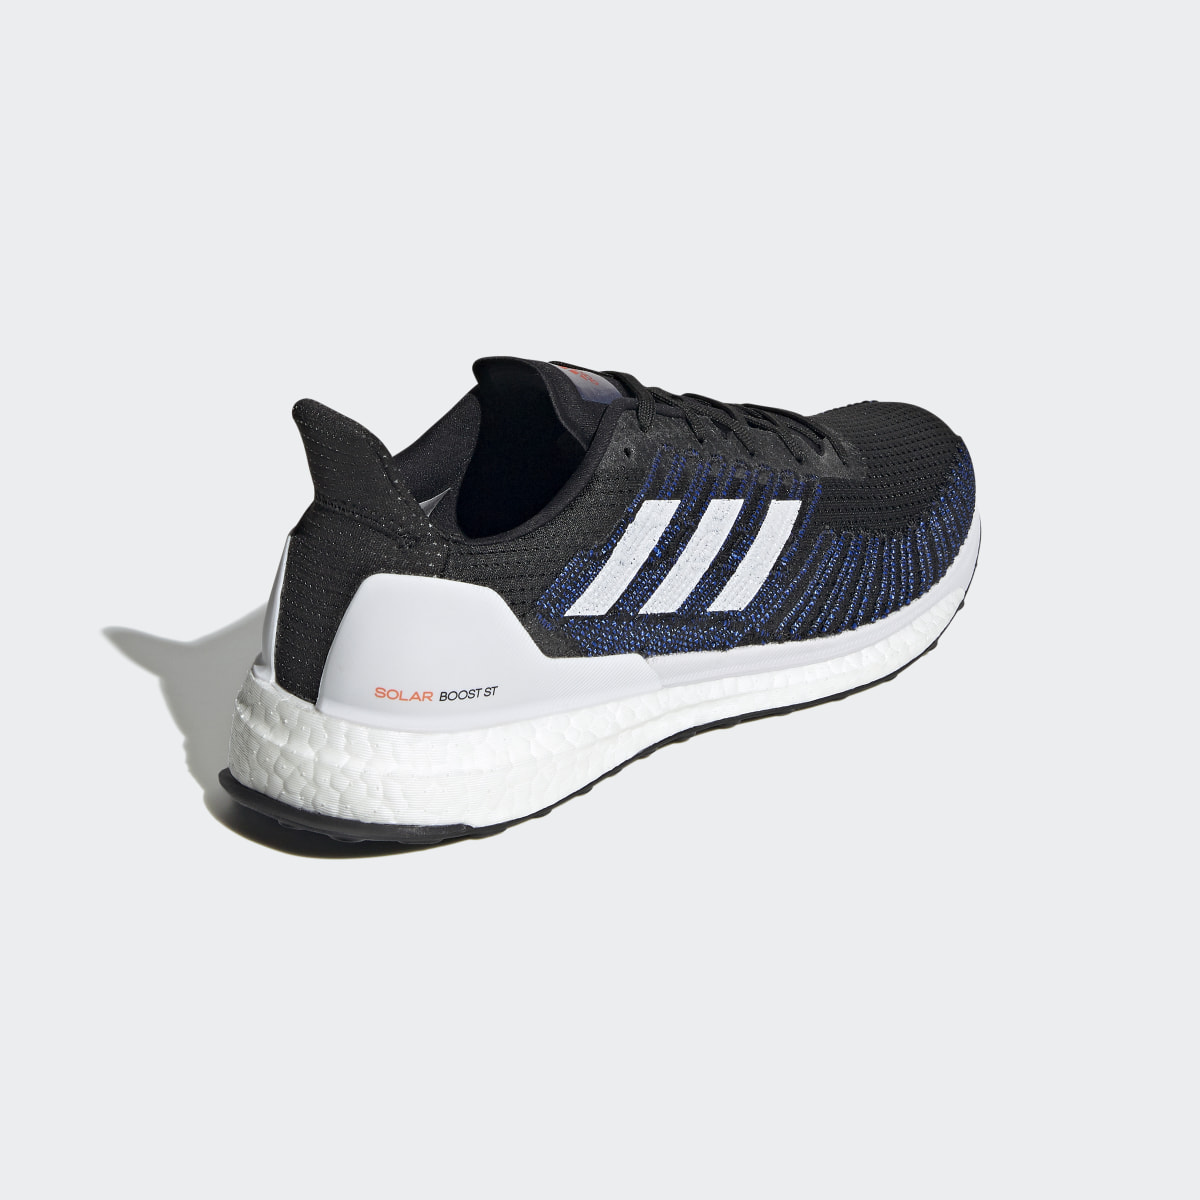 Adidas Solarboost ST 19 Shoes. 7